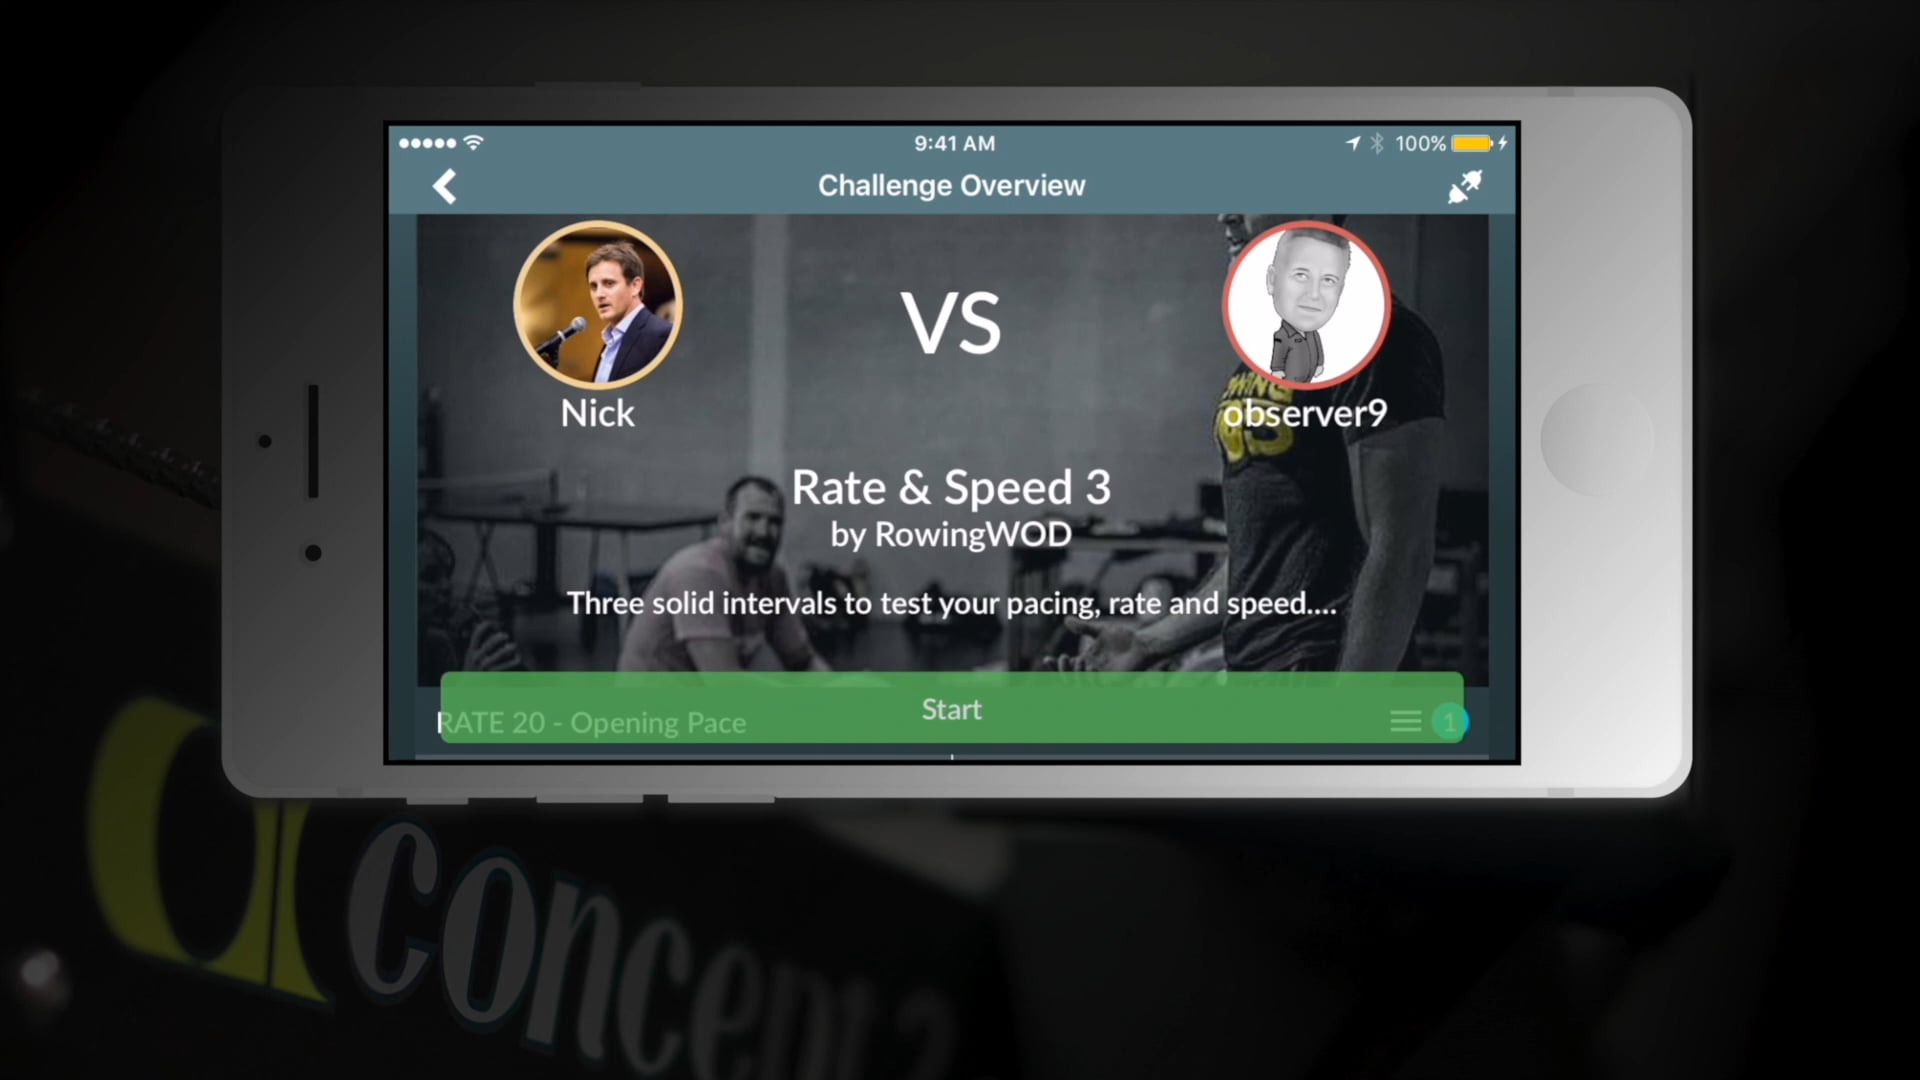 Challenging a Friend in the LiveRowing App for the Concept2 Rowing Machine on Vimeo